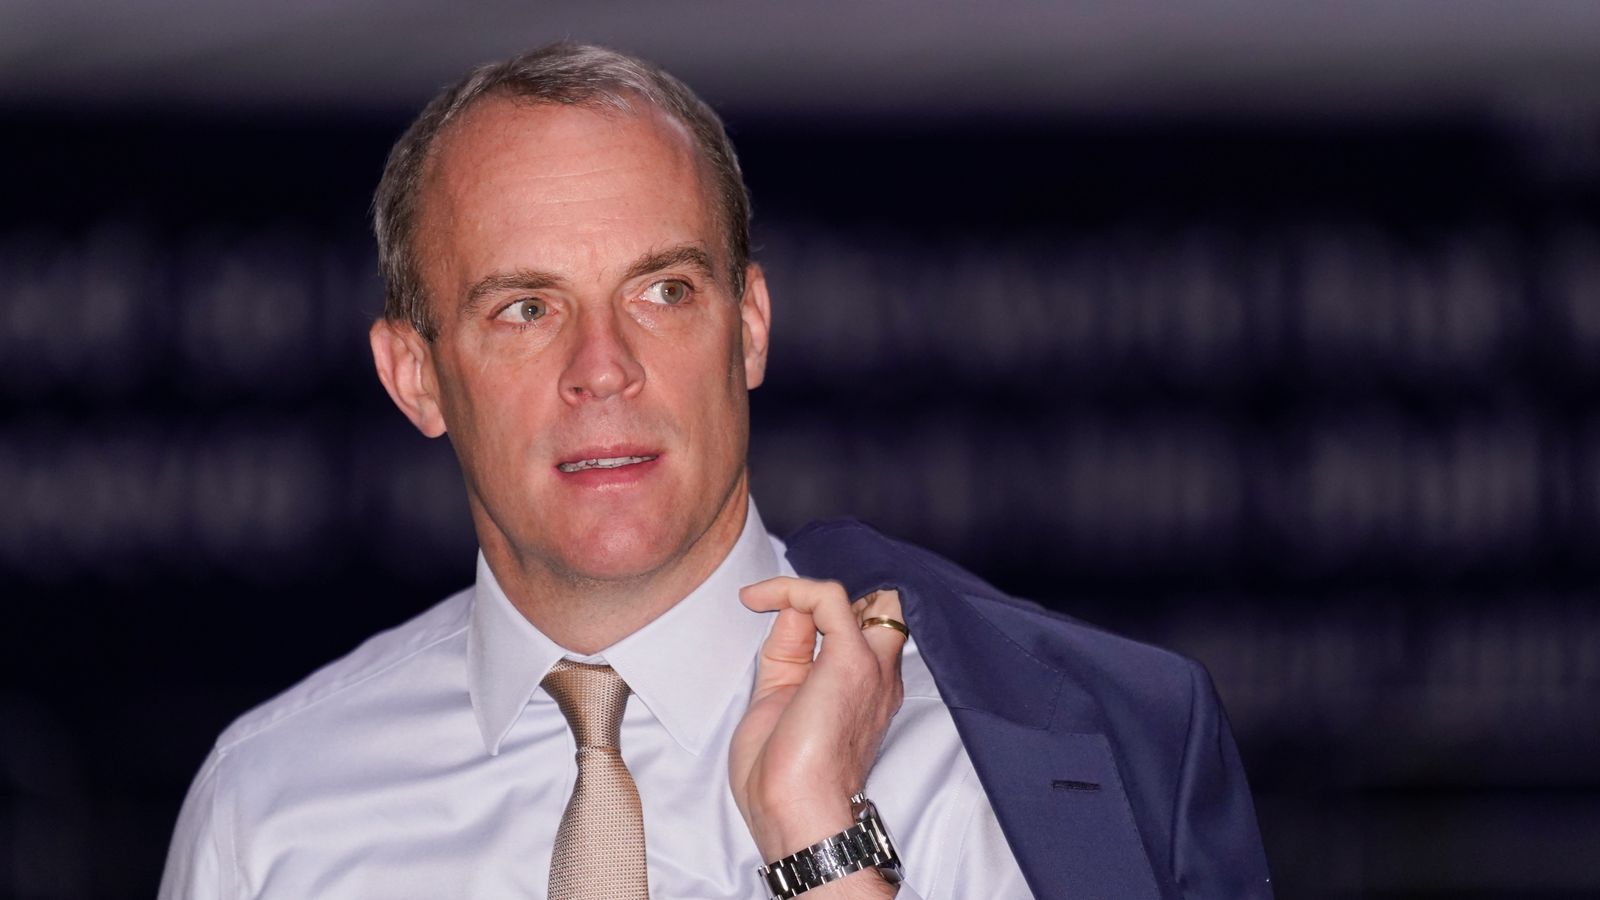 Dominic Raab to stand down as MP at next general election | Politics News